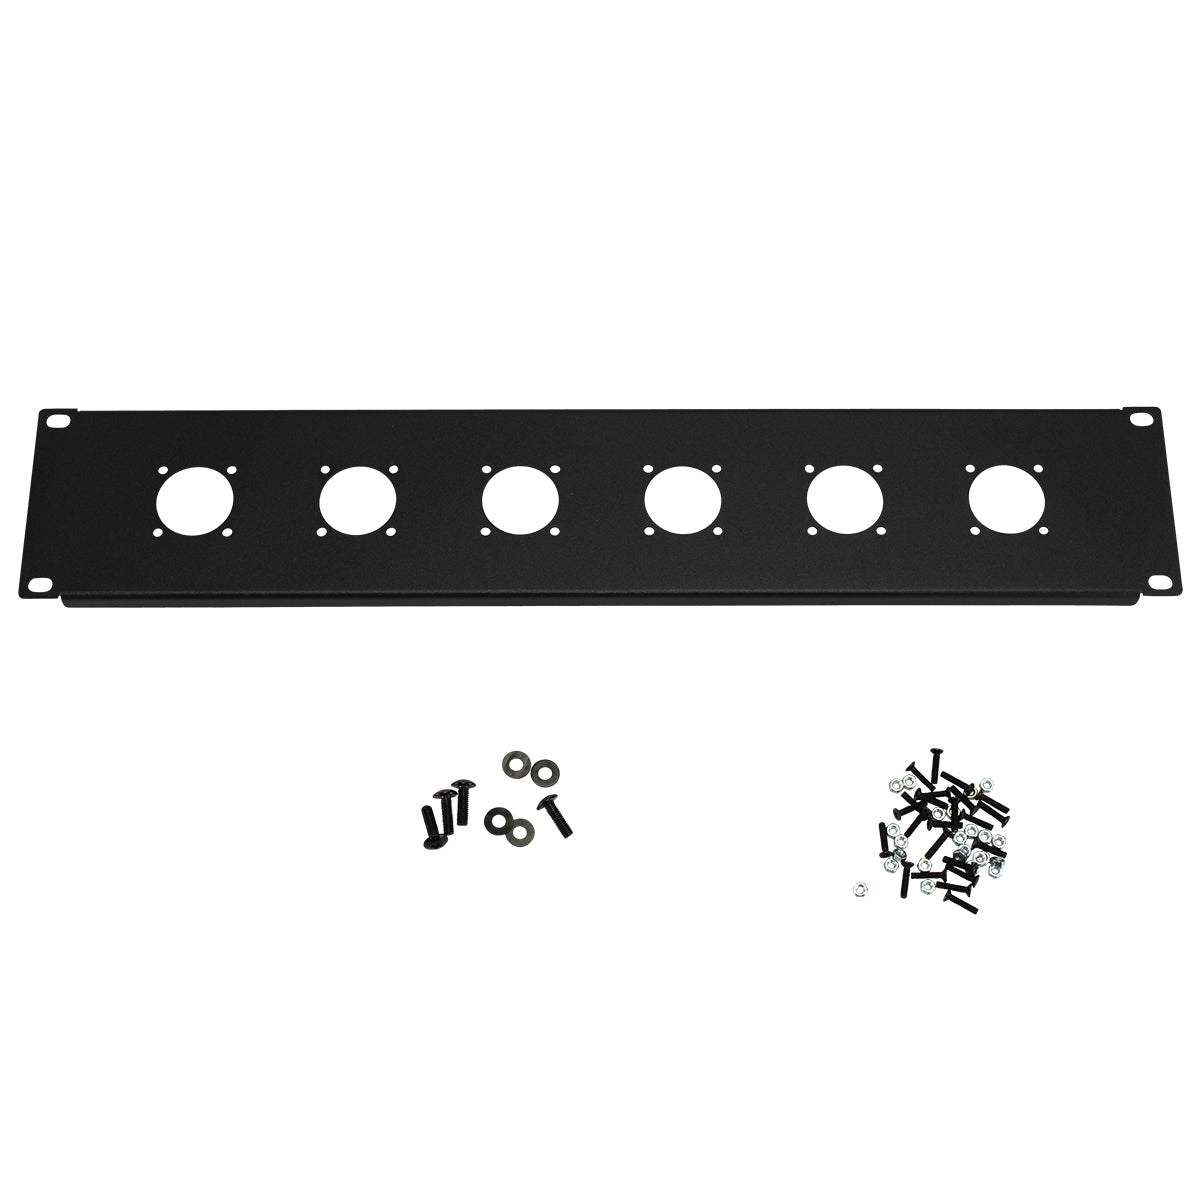 2U Rack Metal Blanking Panel w/ 6 Round Holes for 19in Server Racks and Cabinets